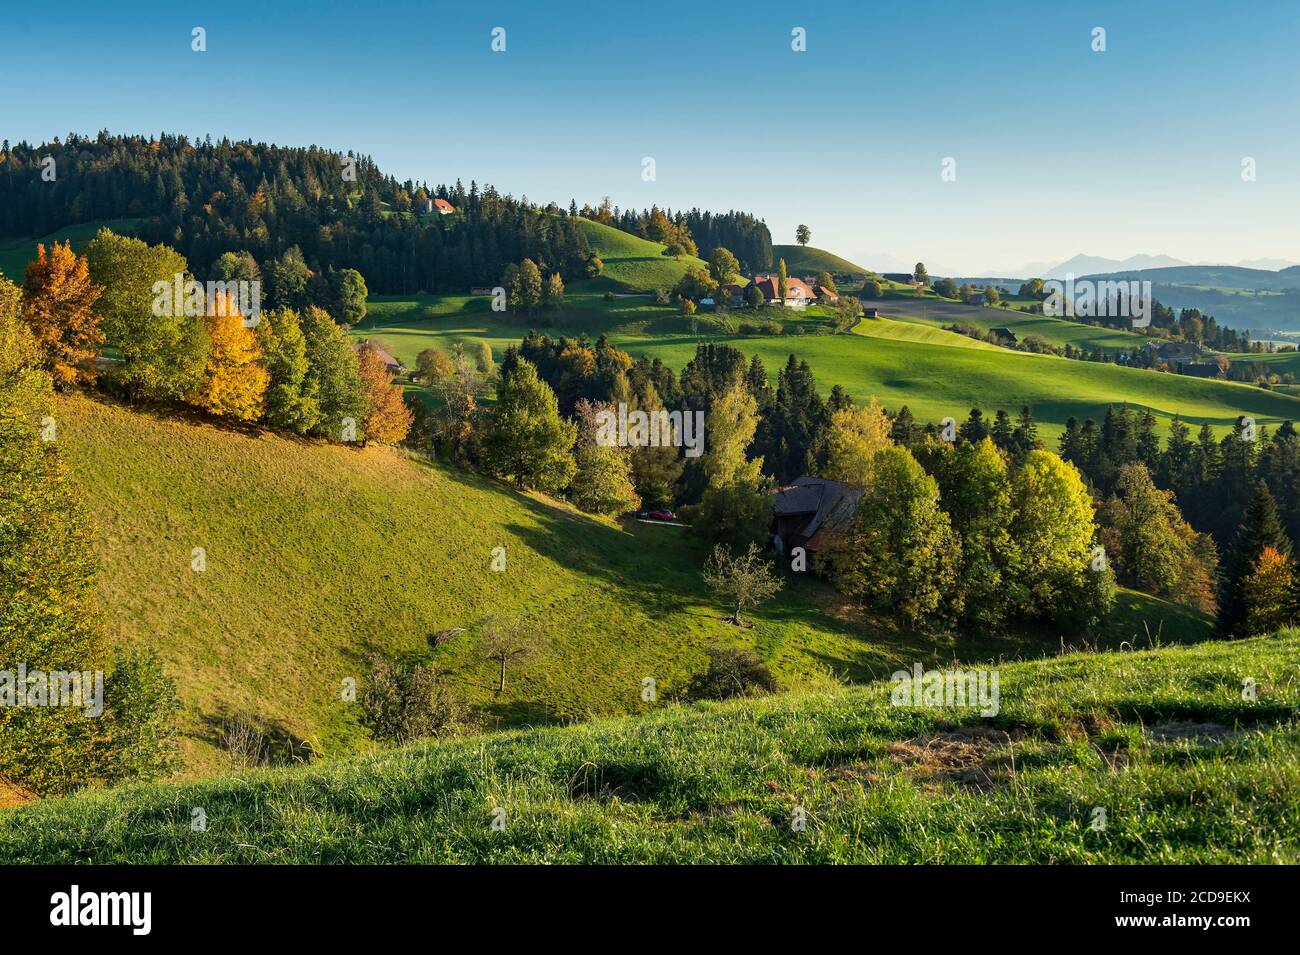 Switzerland, Canton of Bern, Emme Valley, steep hillside landscape, typical of the Emmental region, dotted with traditional wooden farms near Eggiwil Stock Photo